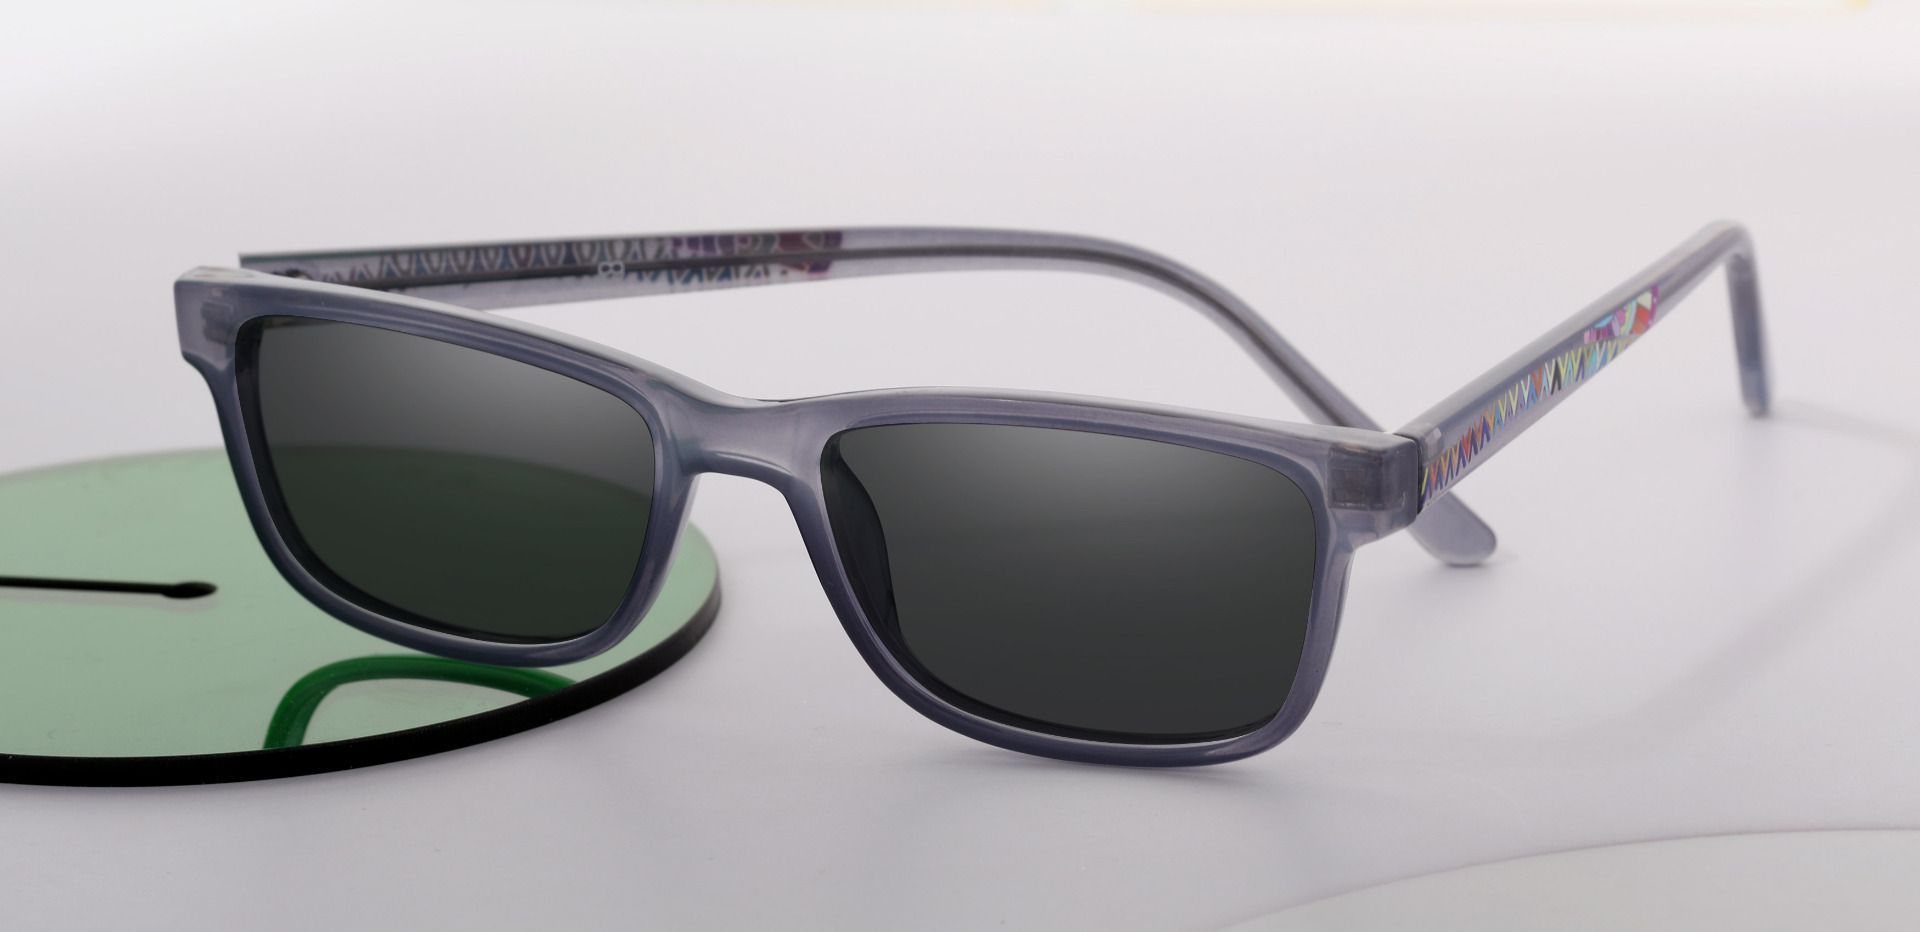 Cory Rectangle Non-Rx Sunglasses - Blue Frame With Gray Lenses